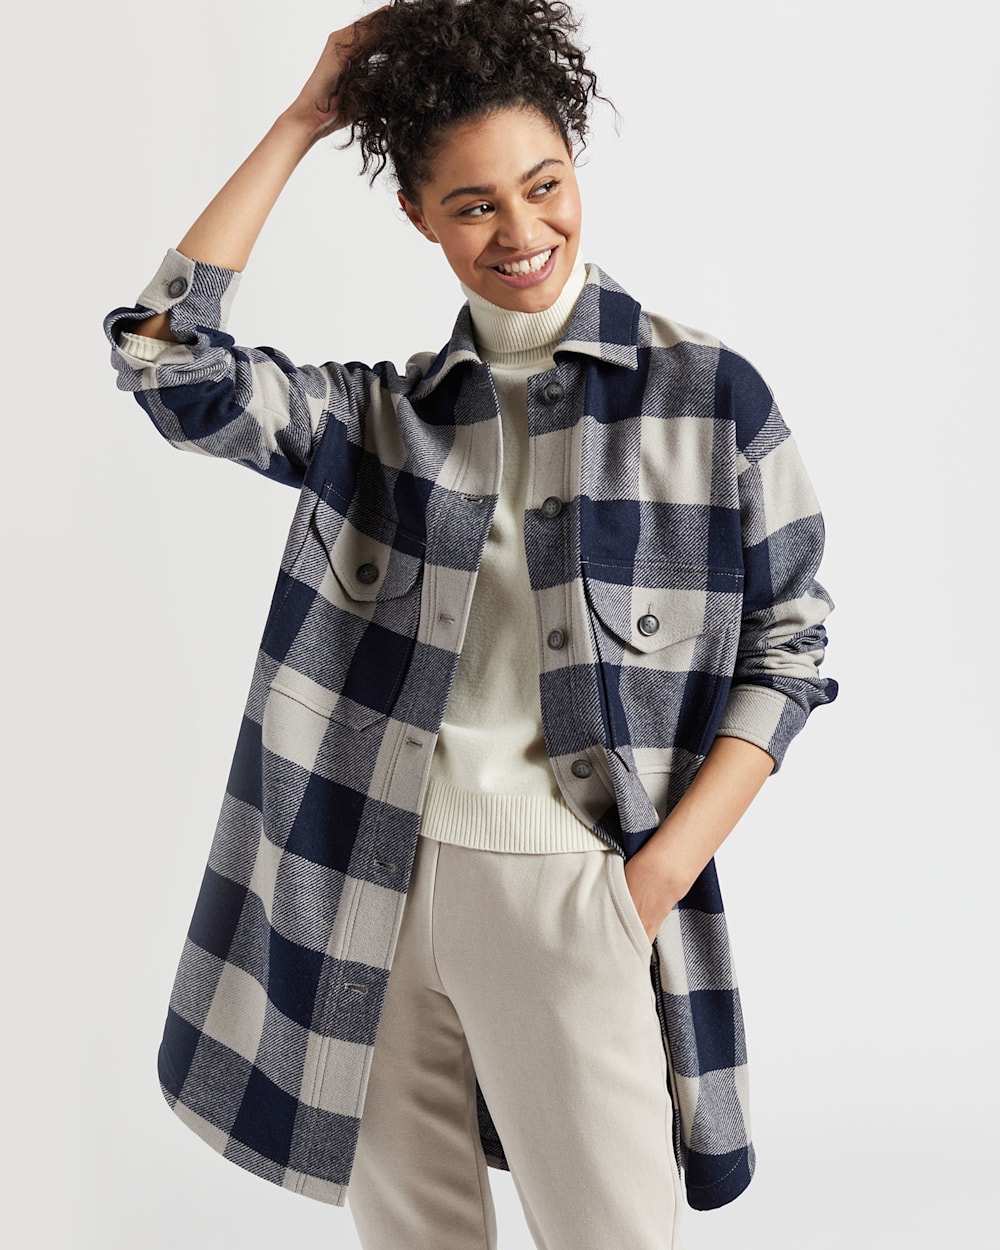 ALTERNATE VIEW OF WOMEN'S OVERSIZED WOOL SHIRT JACKET IN NAVY BUFFALO CHECK image number 4